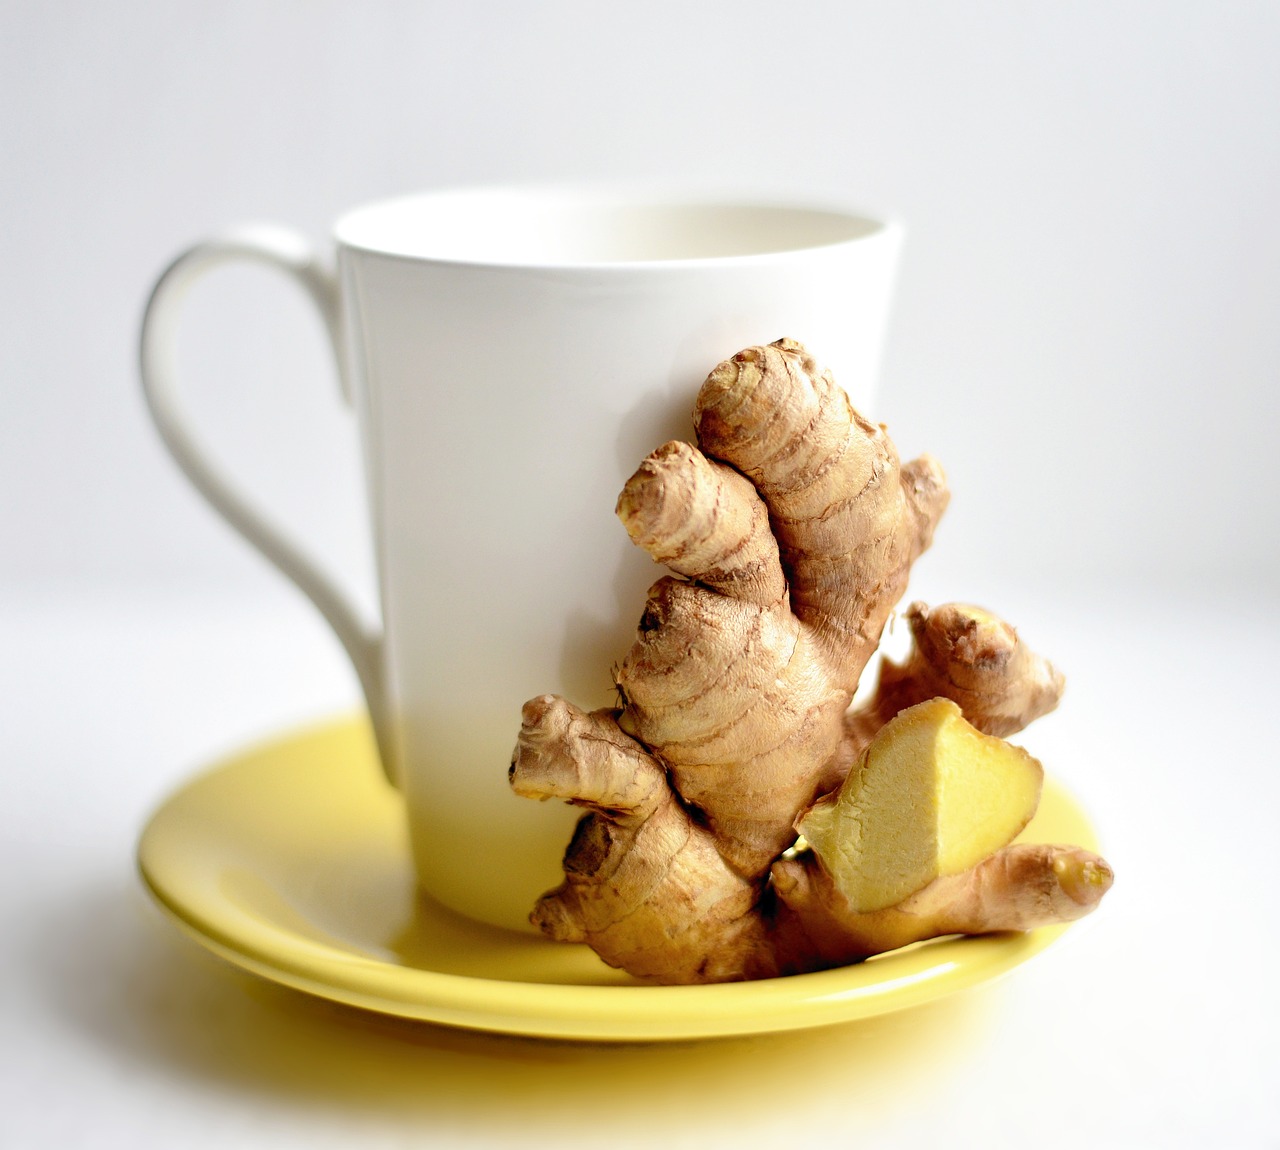 a white cup sitting on top of a yellow plate, inspired by Wlodzimierz Tetmajer, shutterstock, ginger, set against a white background, hr ginger, herbs